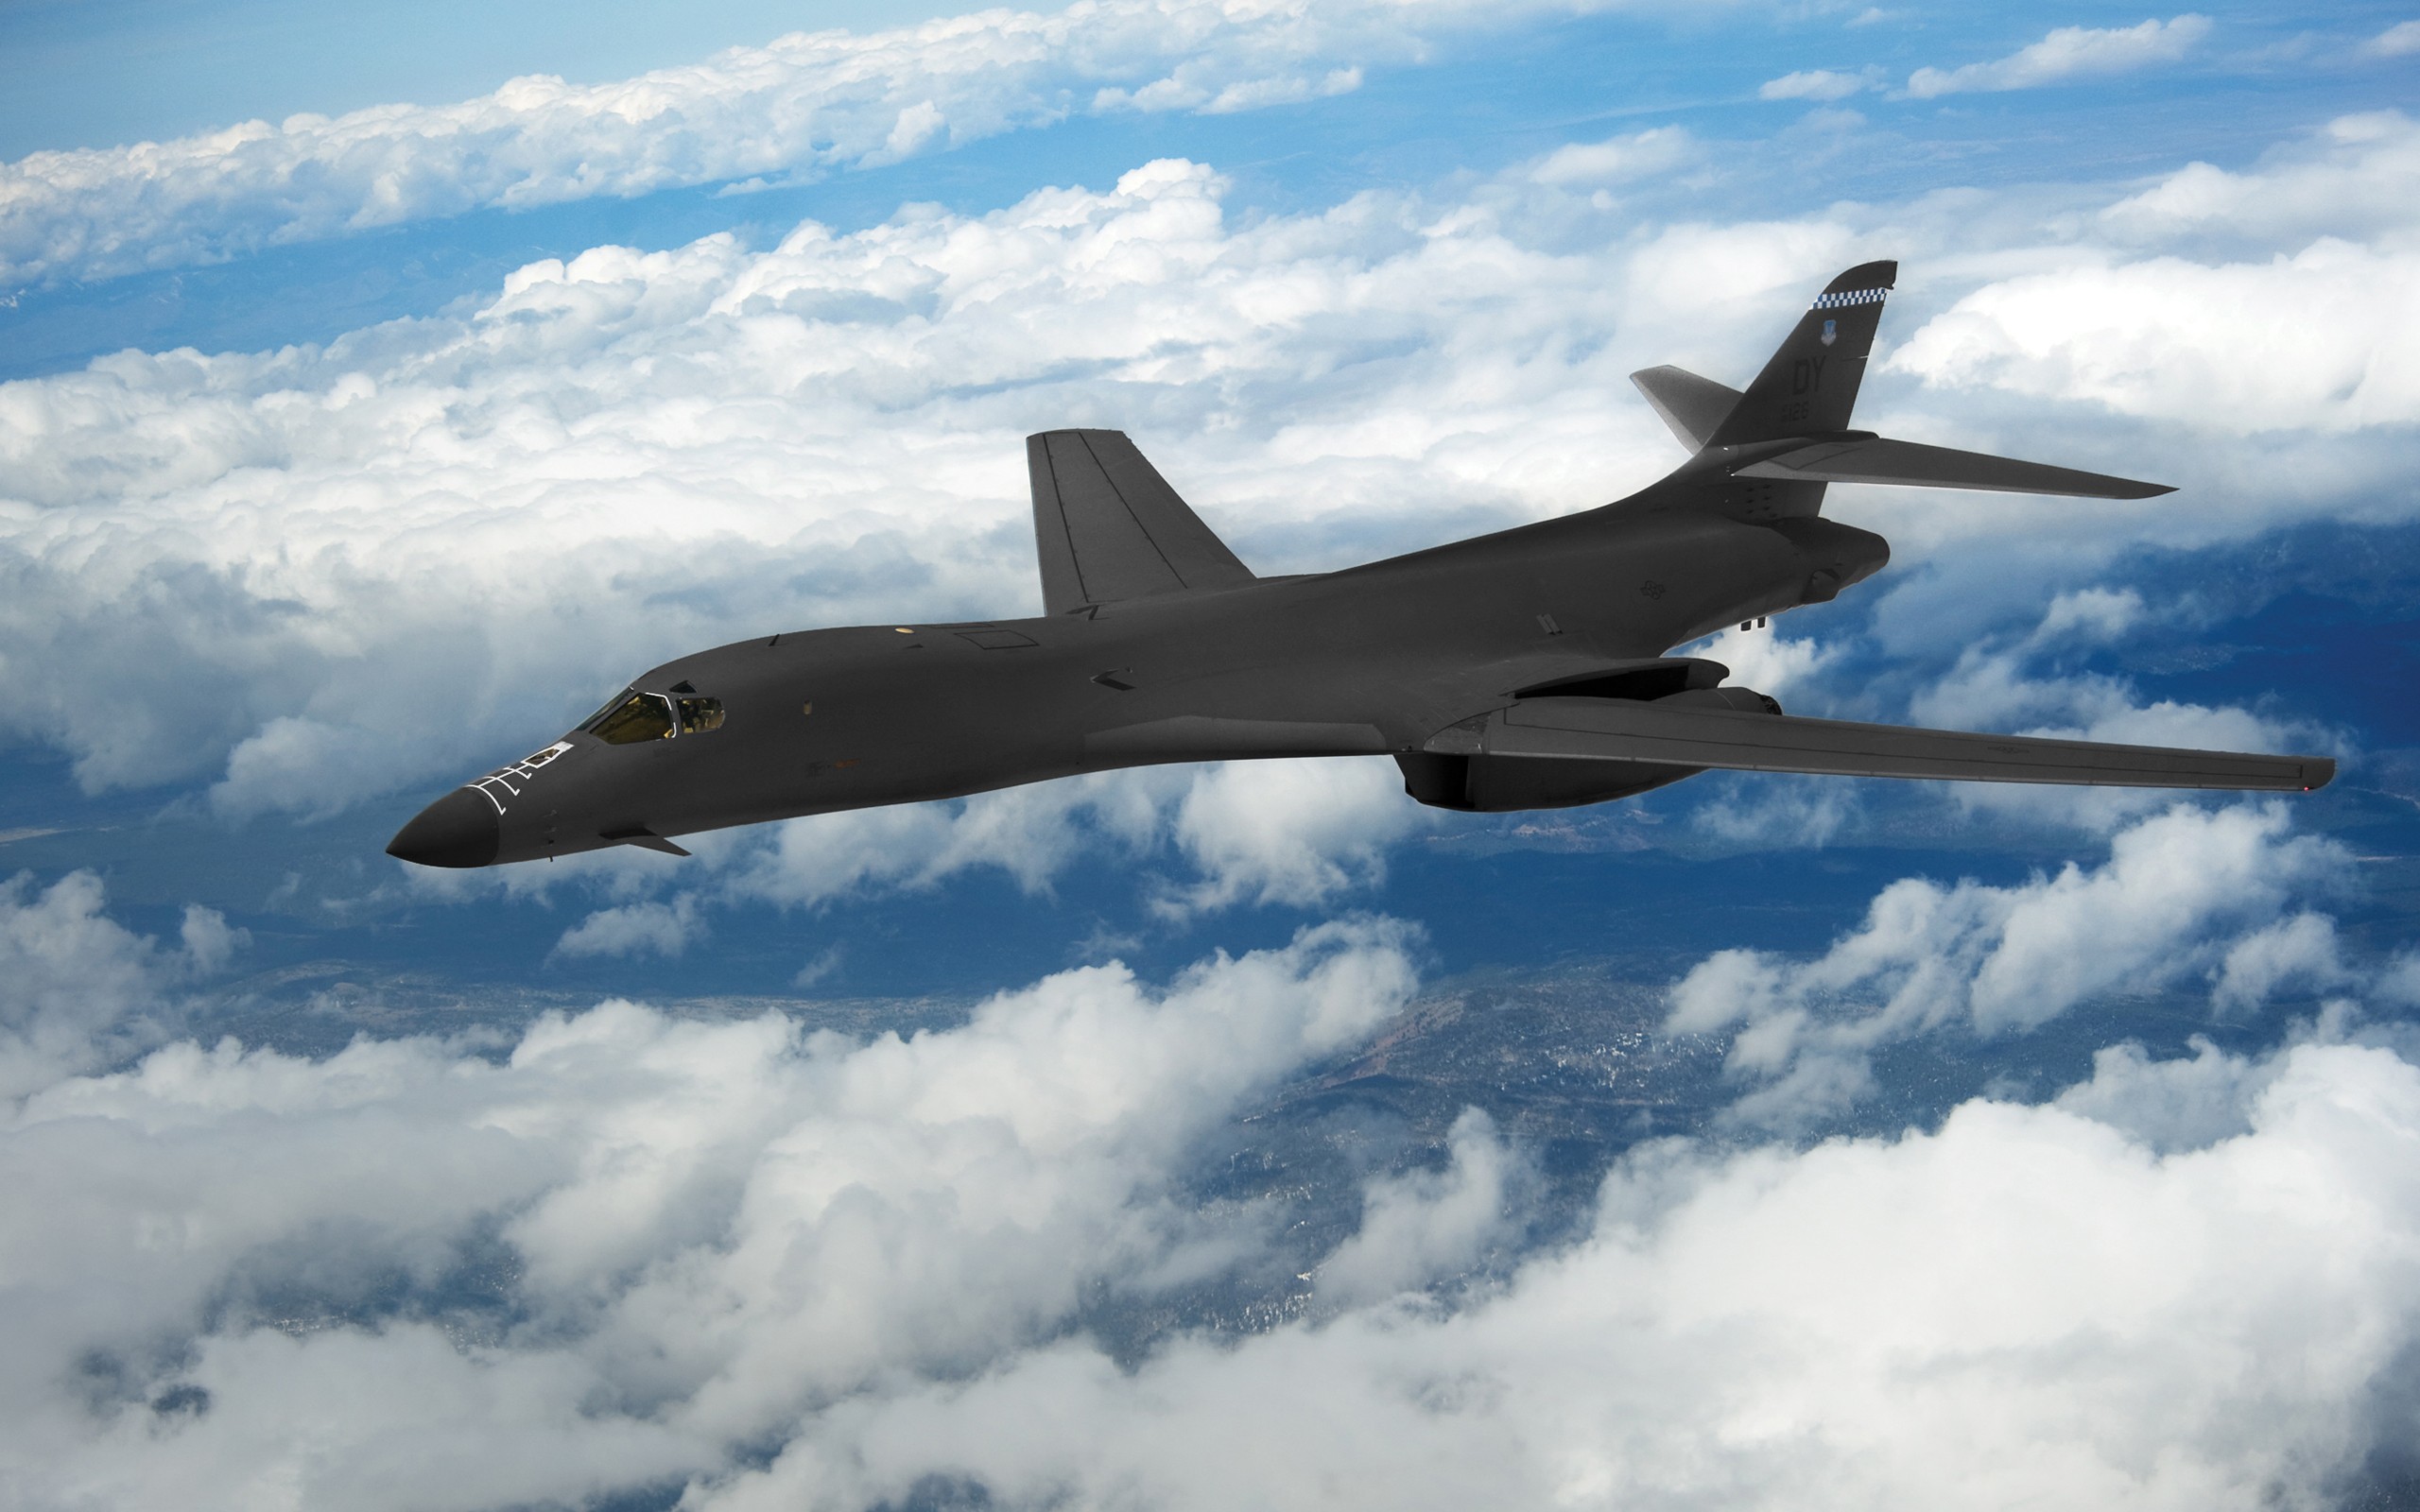 Rockwell B 1 Lancer, Bomber, Strategic bomber, Military aircraft, Aircraft, US Air Force, Clouds Wallpaper